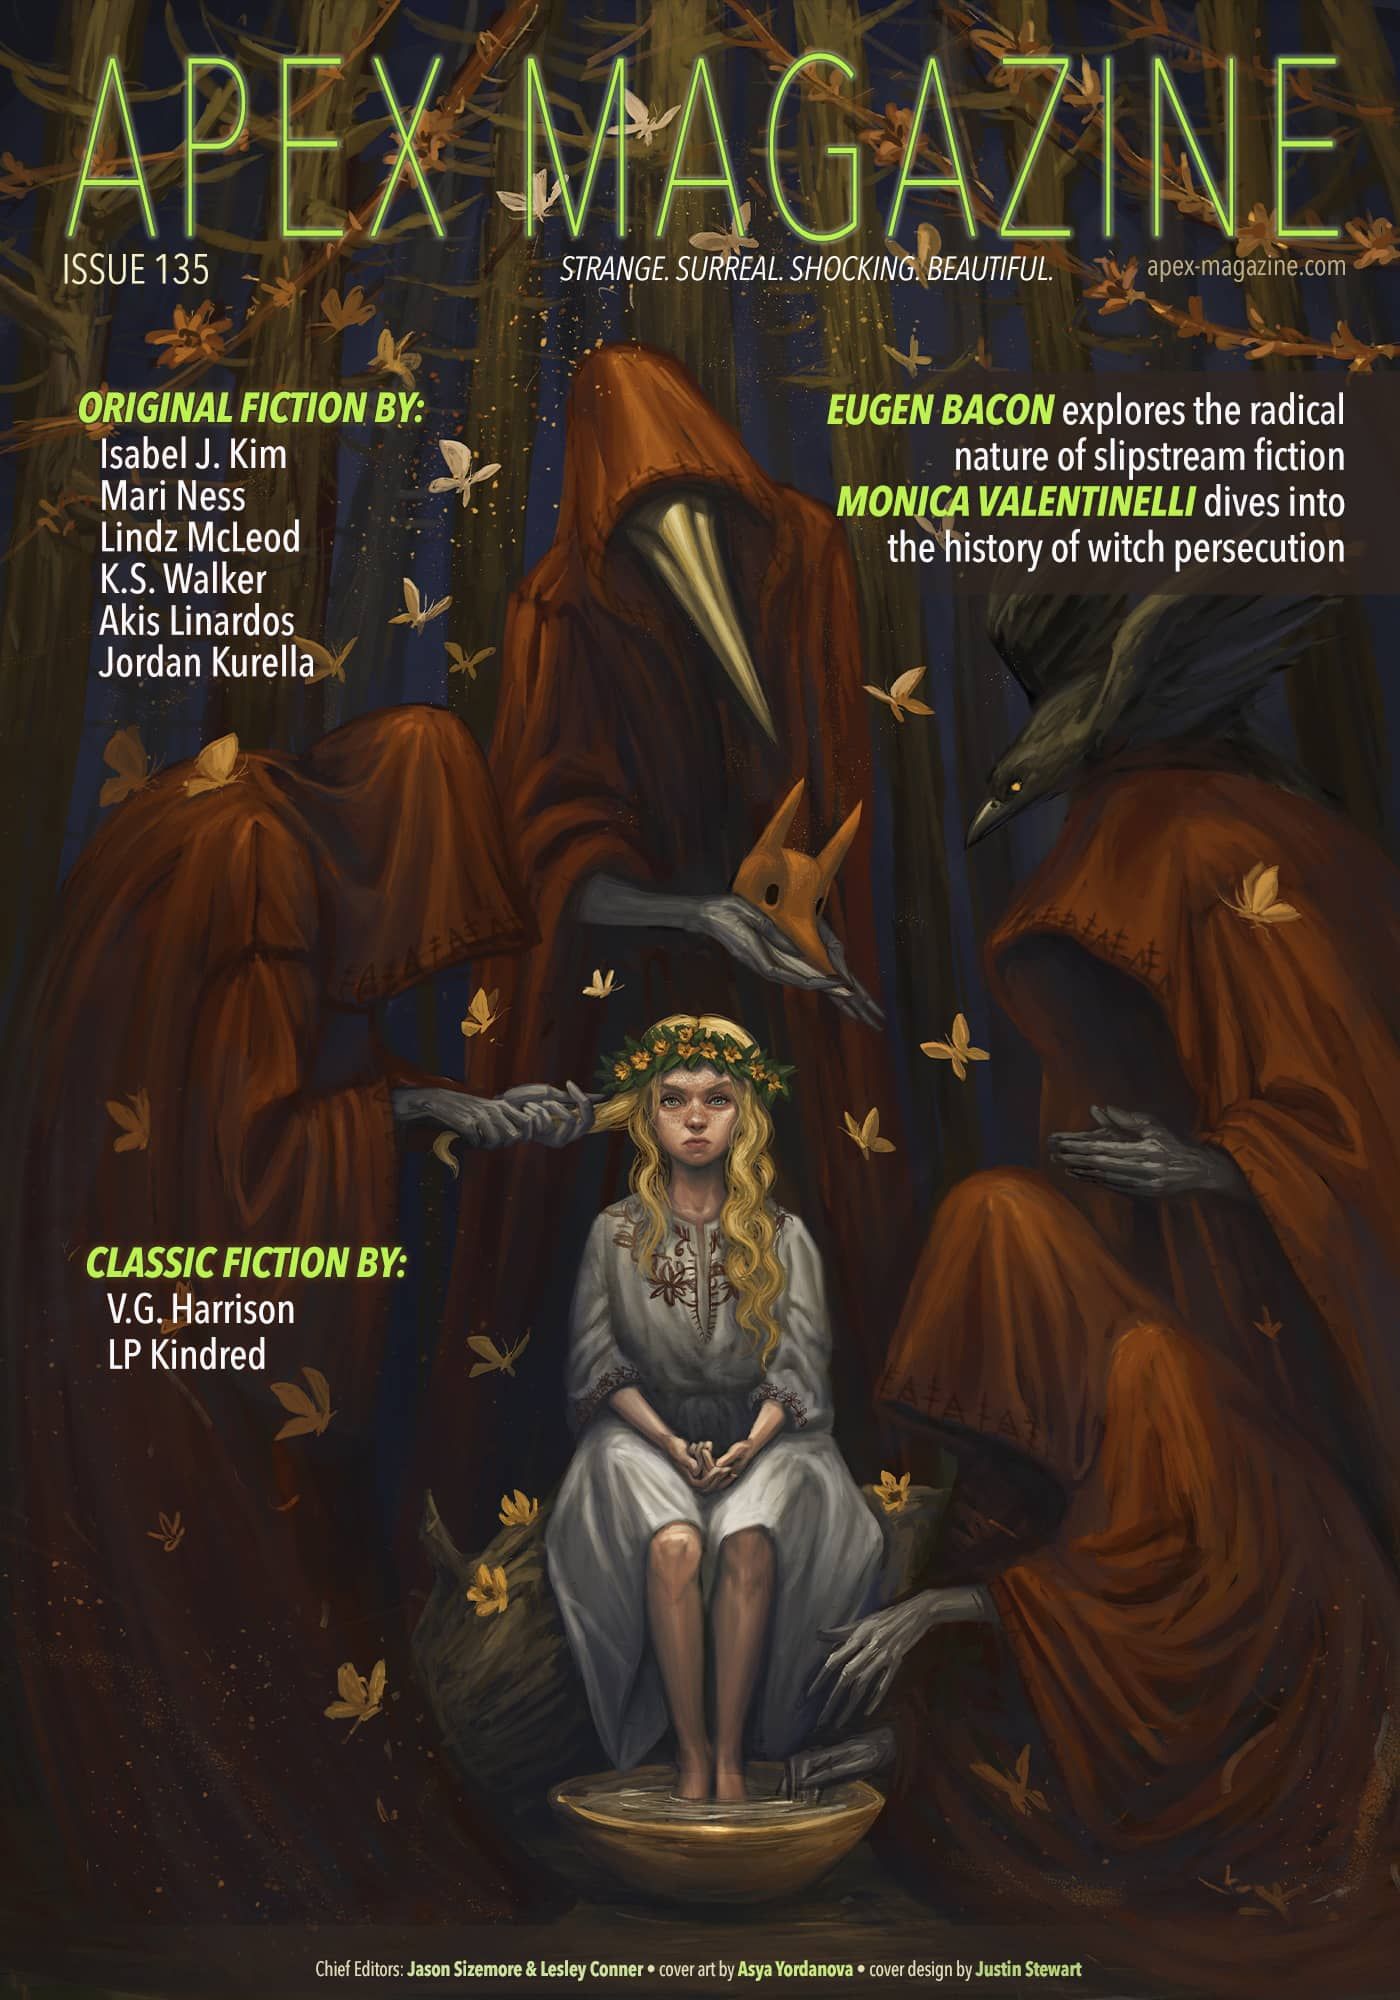 Cover image of Apex Magazine, Issue 135, which includes some Halloween short fiction